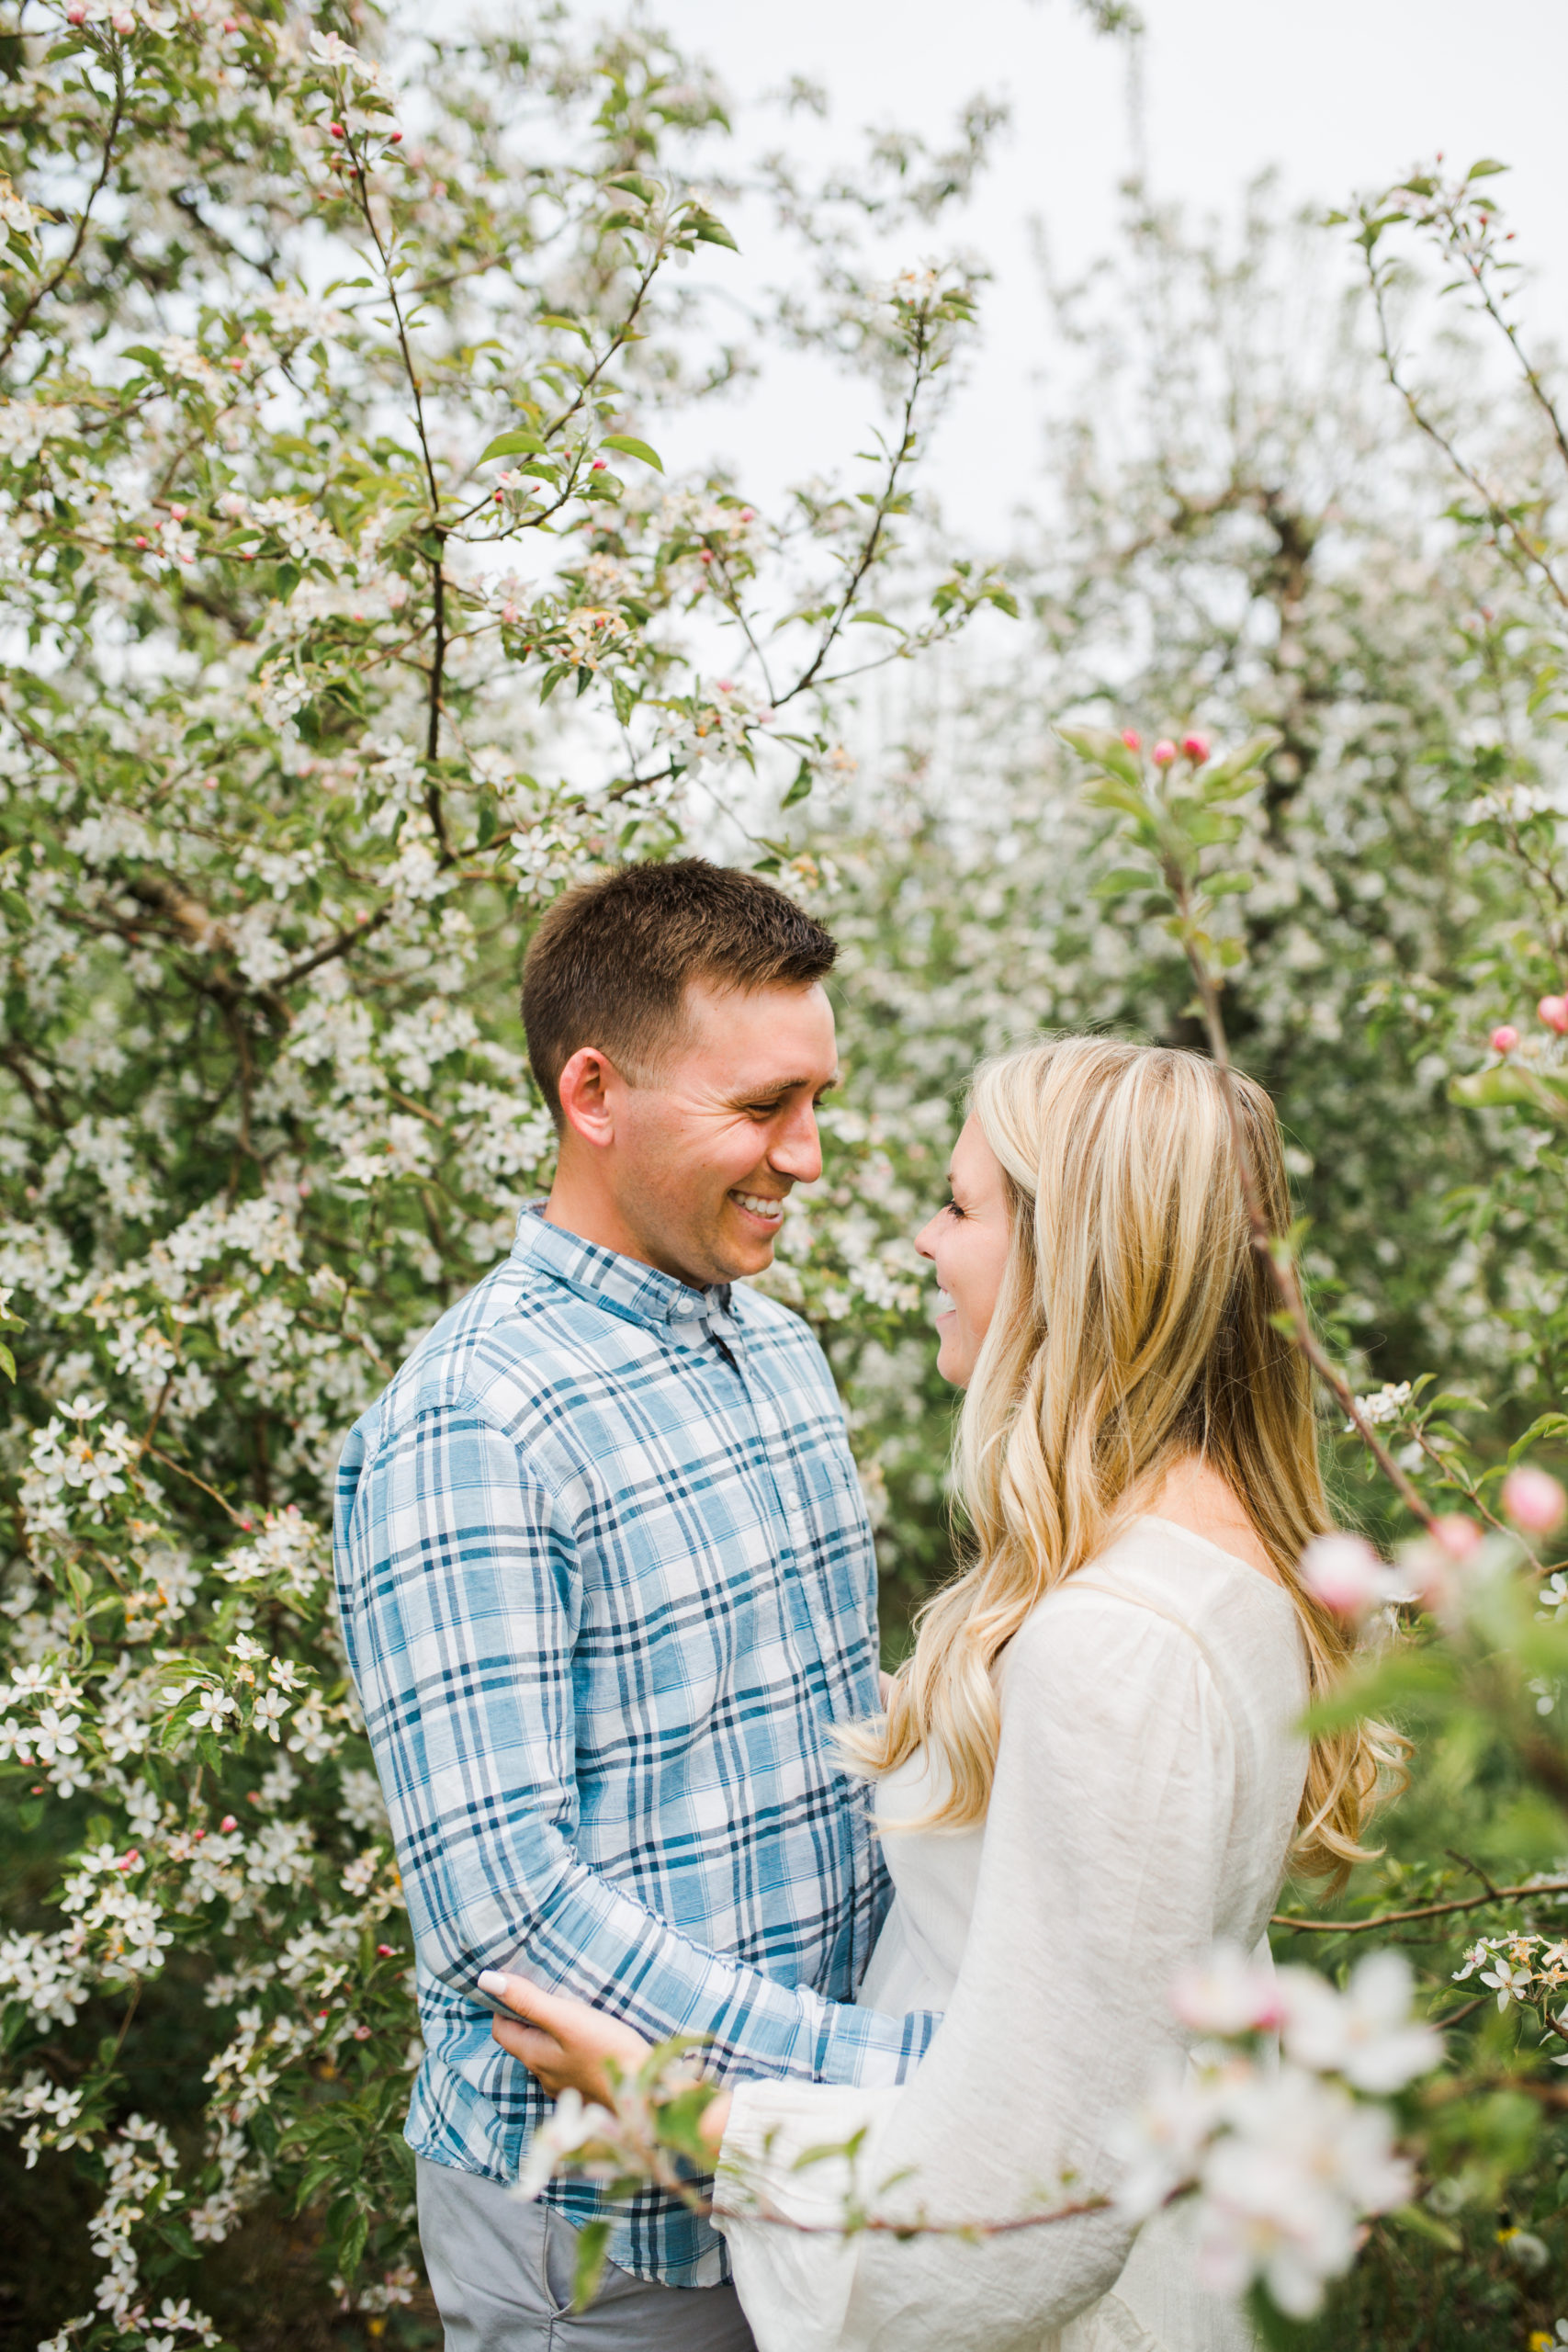 Apple blossoms
engagement session
orchards 